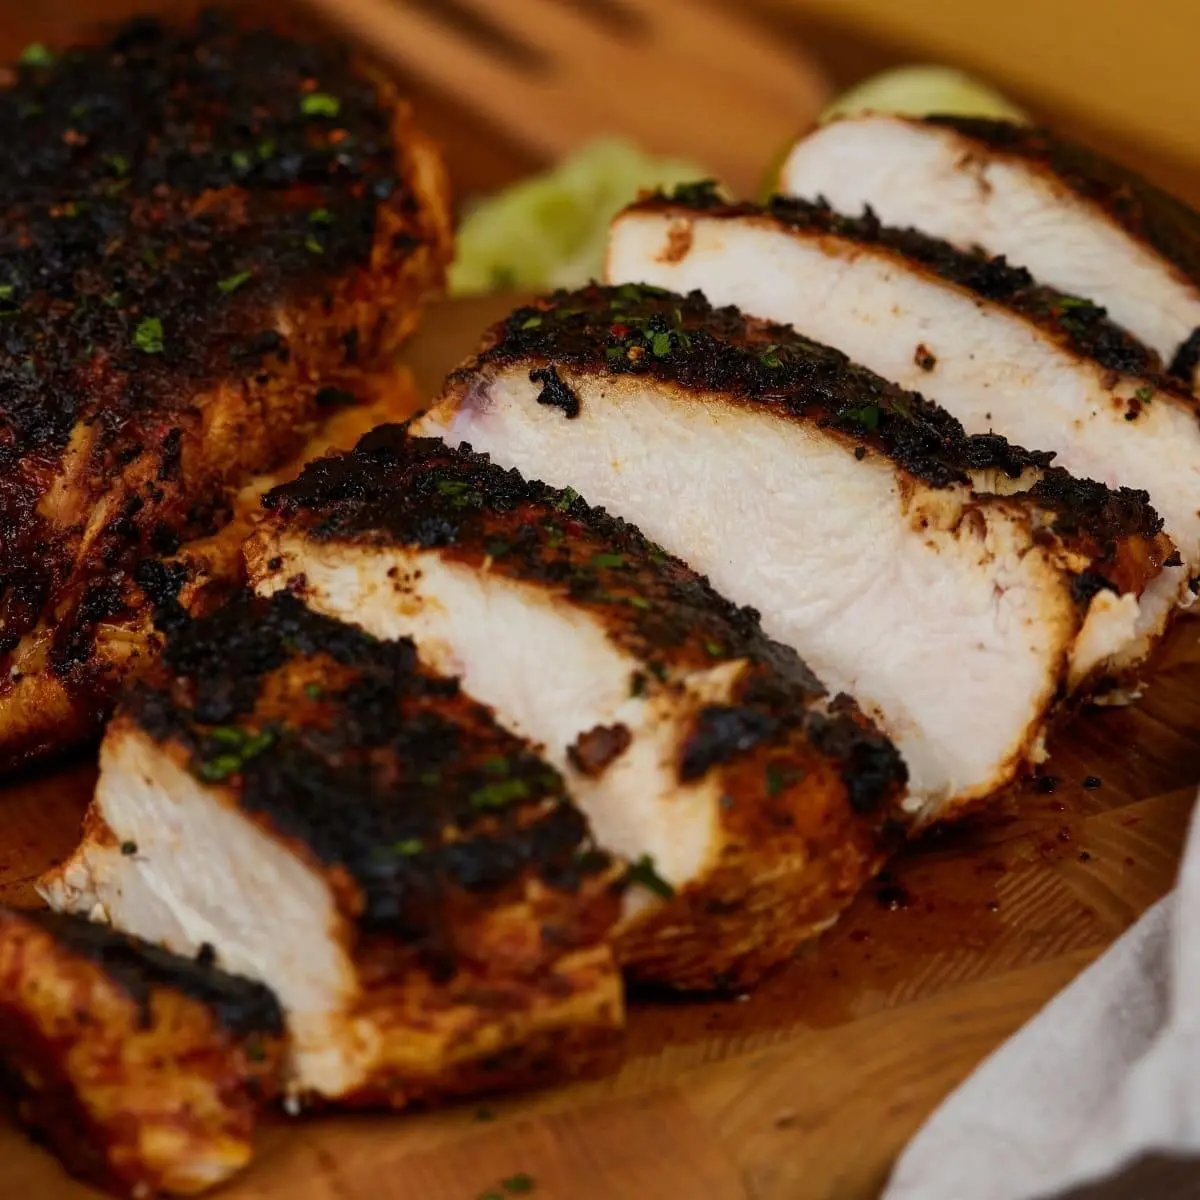 smoked blackened chicken - What's the difference between char grilled and blackened